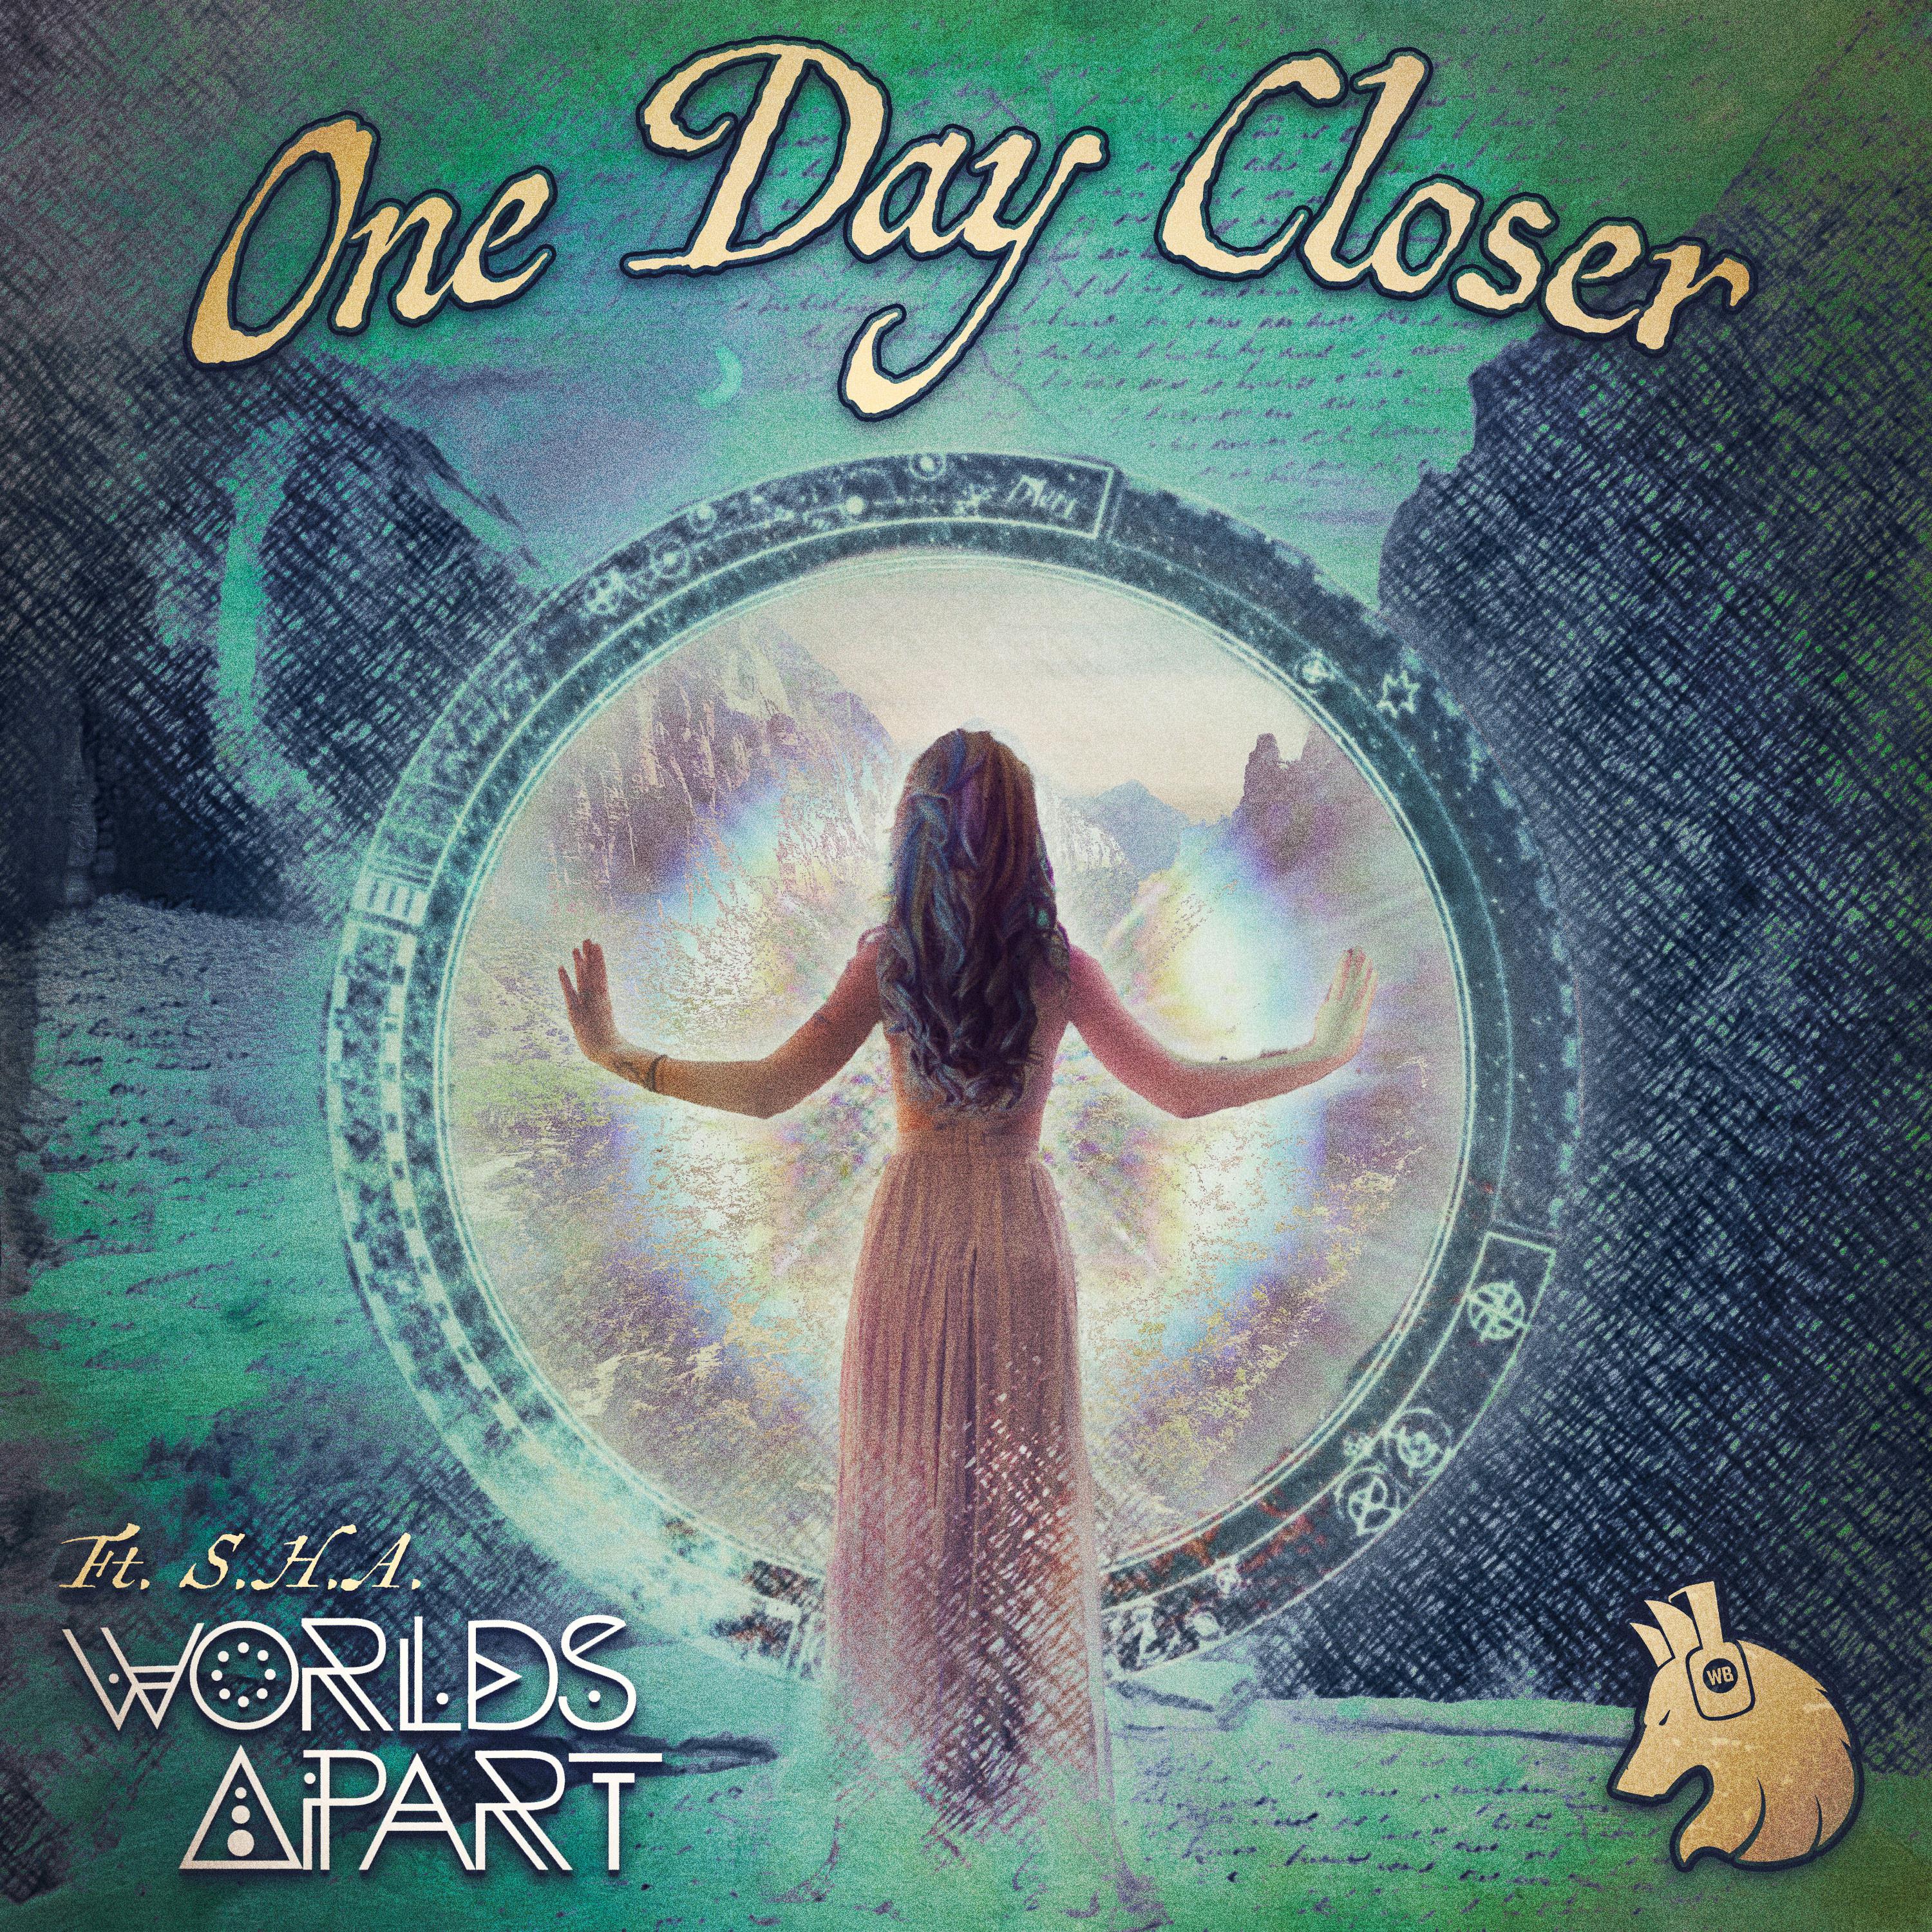 Worlds Apart - One Day Closer (feat. S.H.A.)